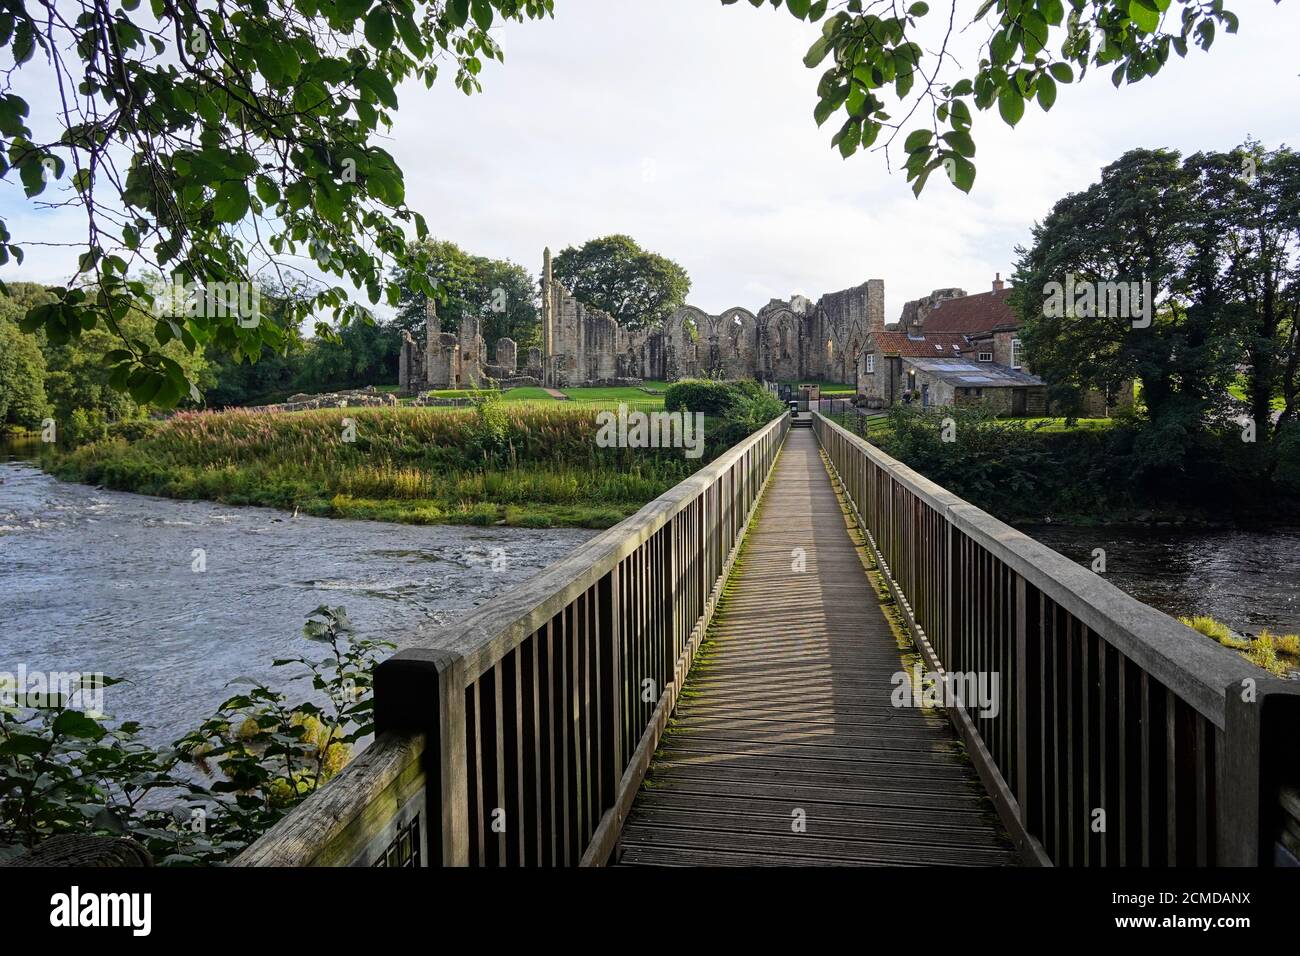 Wooden footbridge over River Wear at Finchale Priory Stock Photo